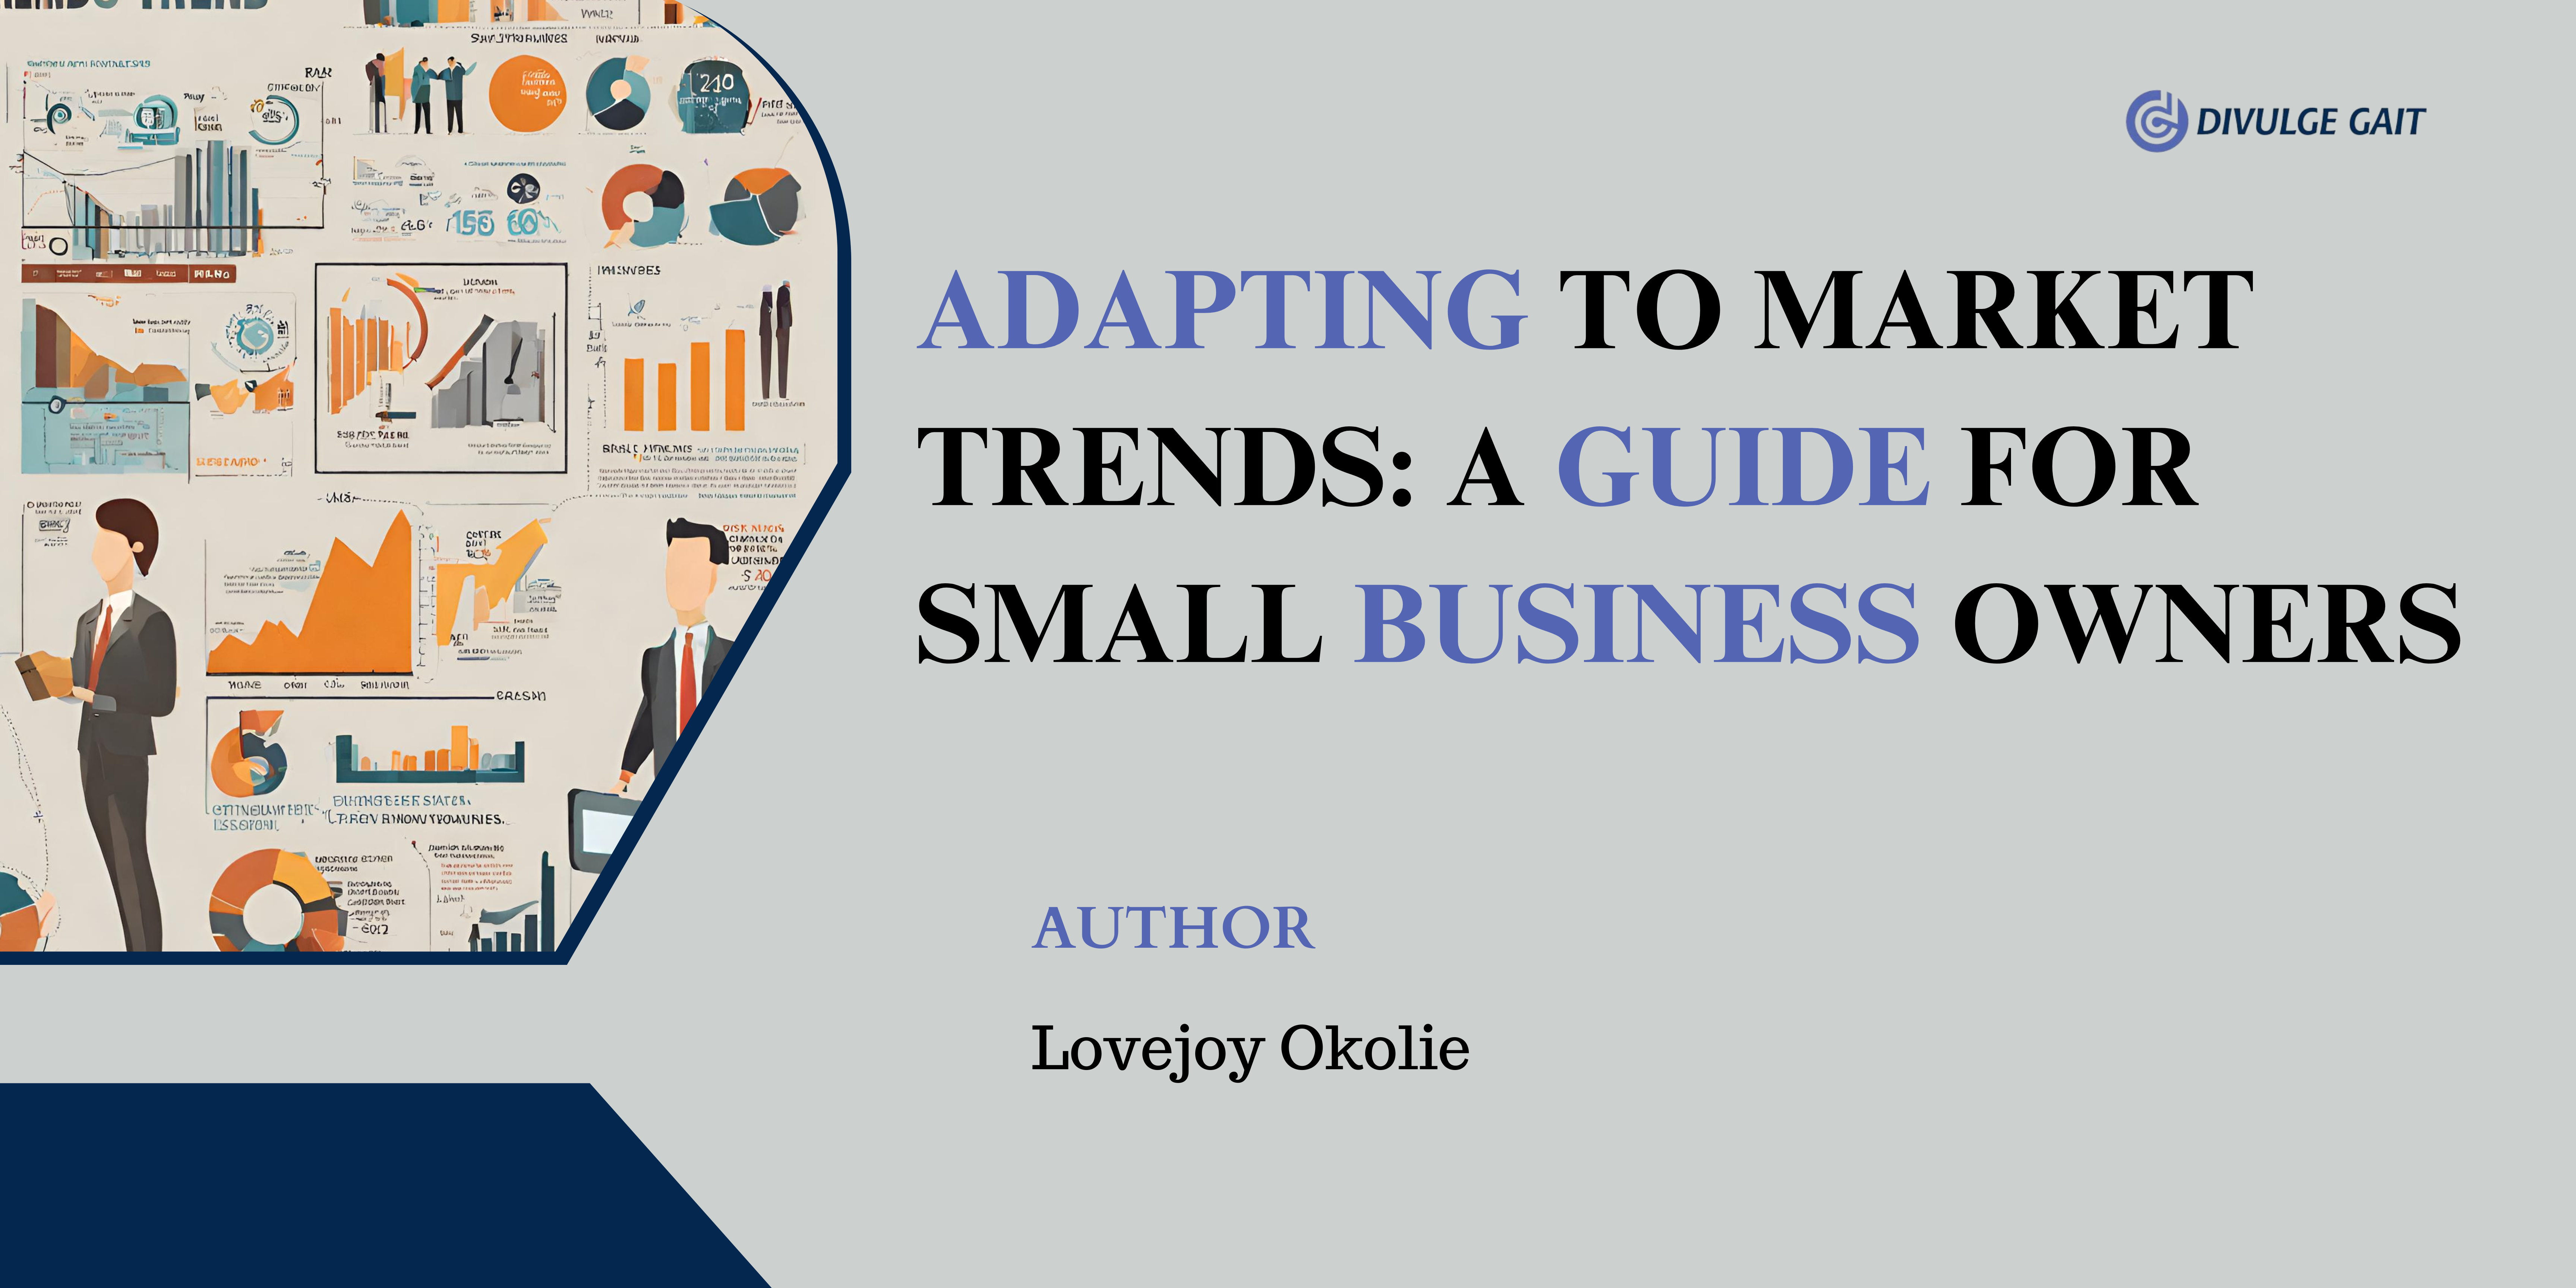 Adapting to Market Trends: A Guide for Small Business Owners.